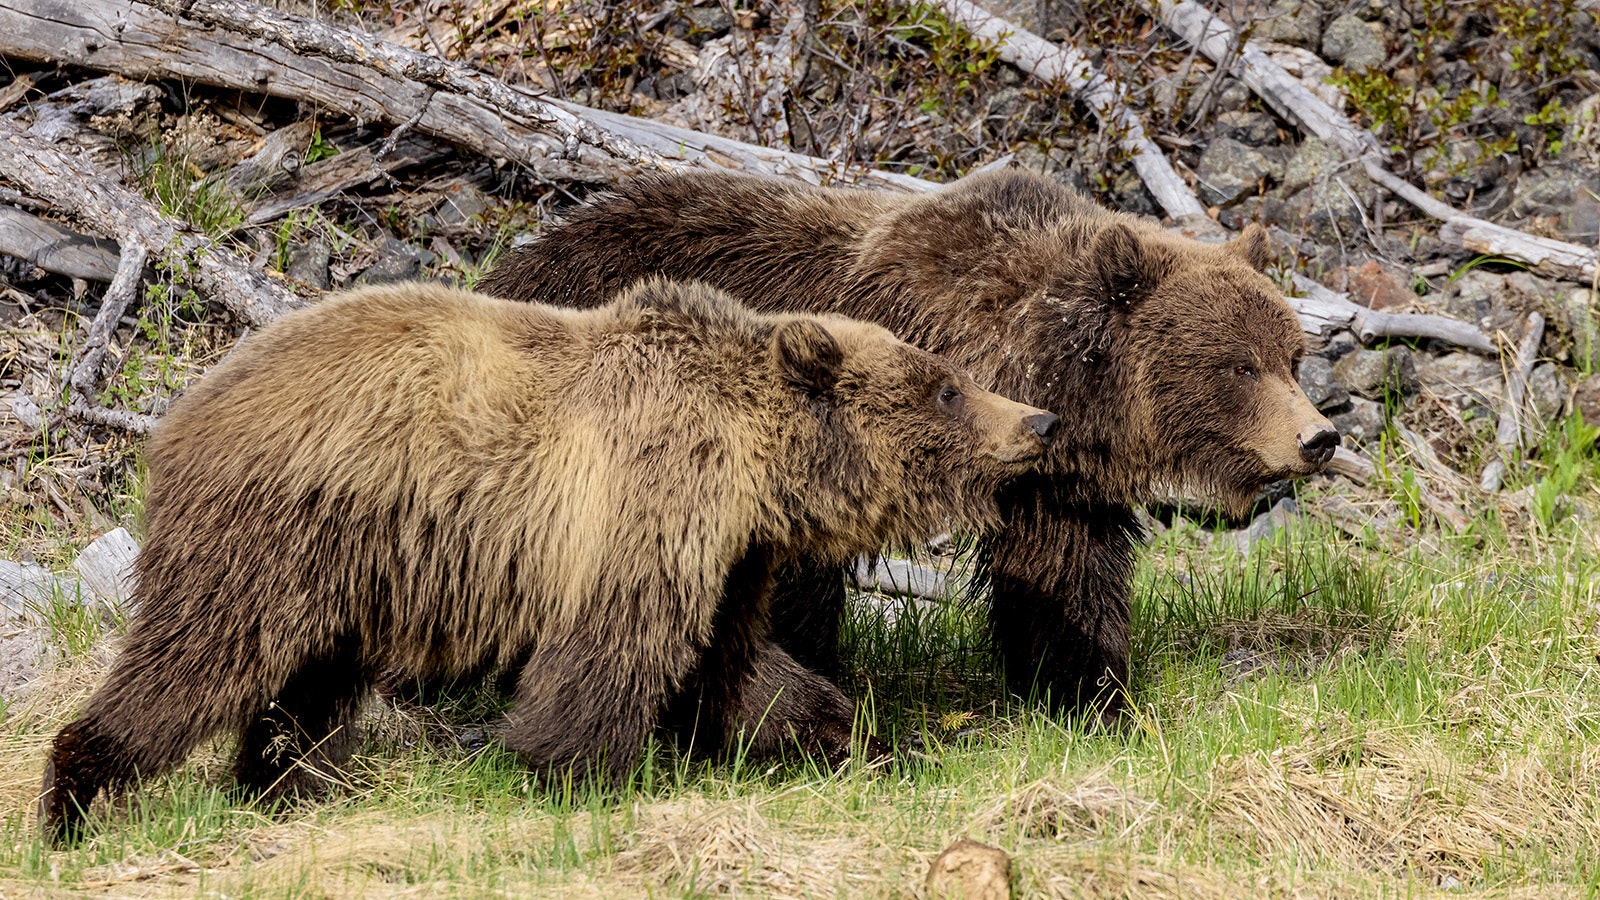 A pair of Wyoming grizzlies in the Yellowstone Ecosystem.